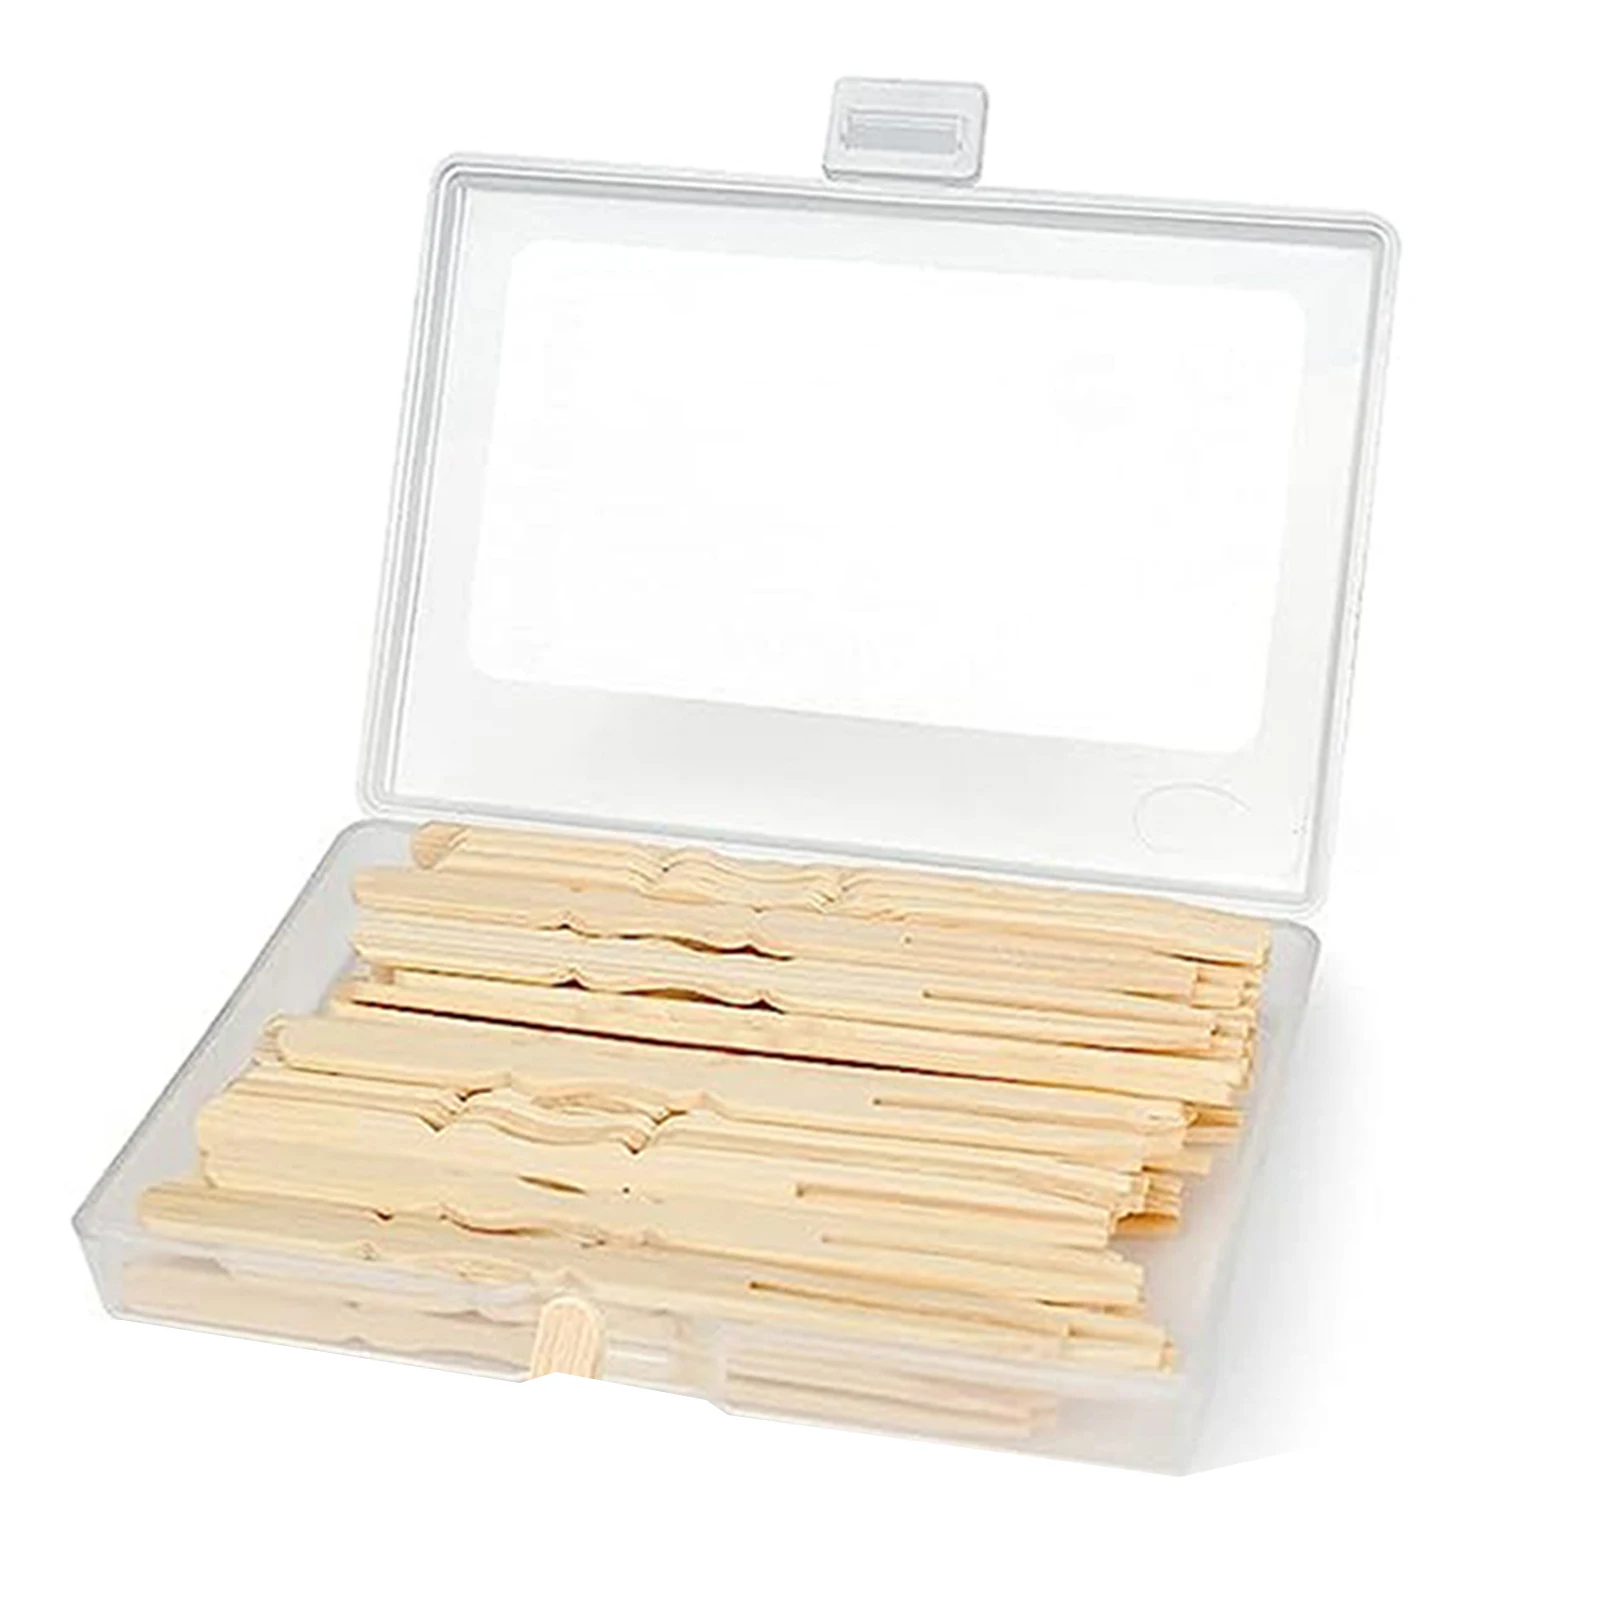 

80PCS Mini Bamboo Forks Double Bamboo Prong Picks Cocktail Tasting Forks for Party Fruit Charcuterie Accessories Hot Sale